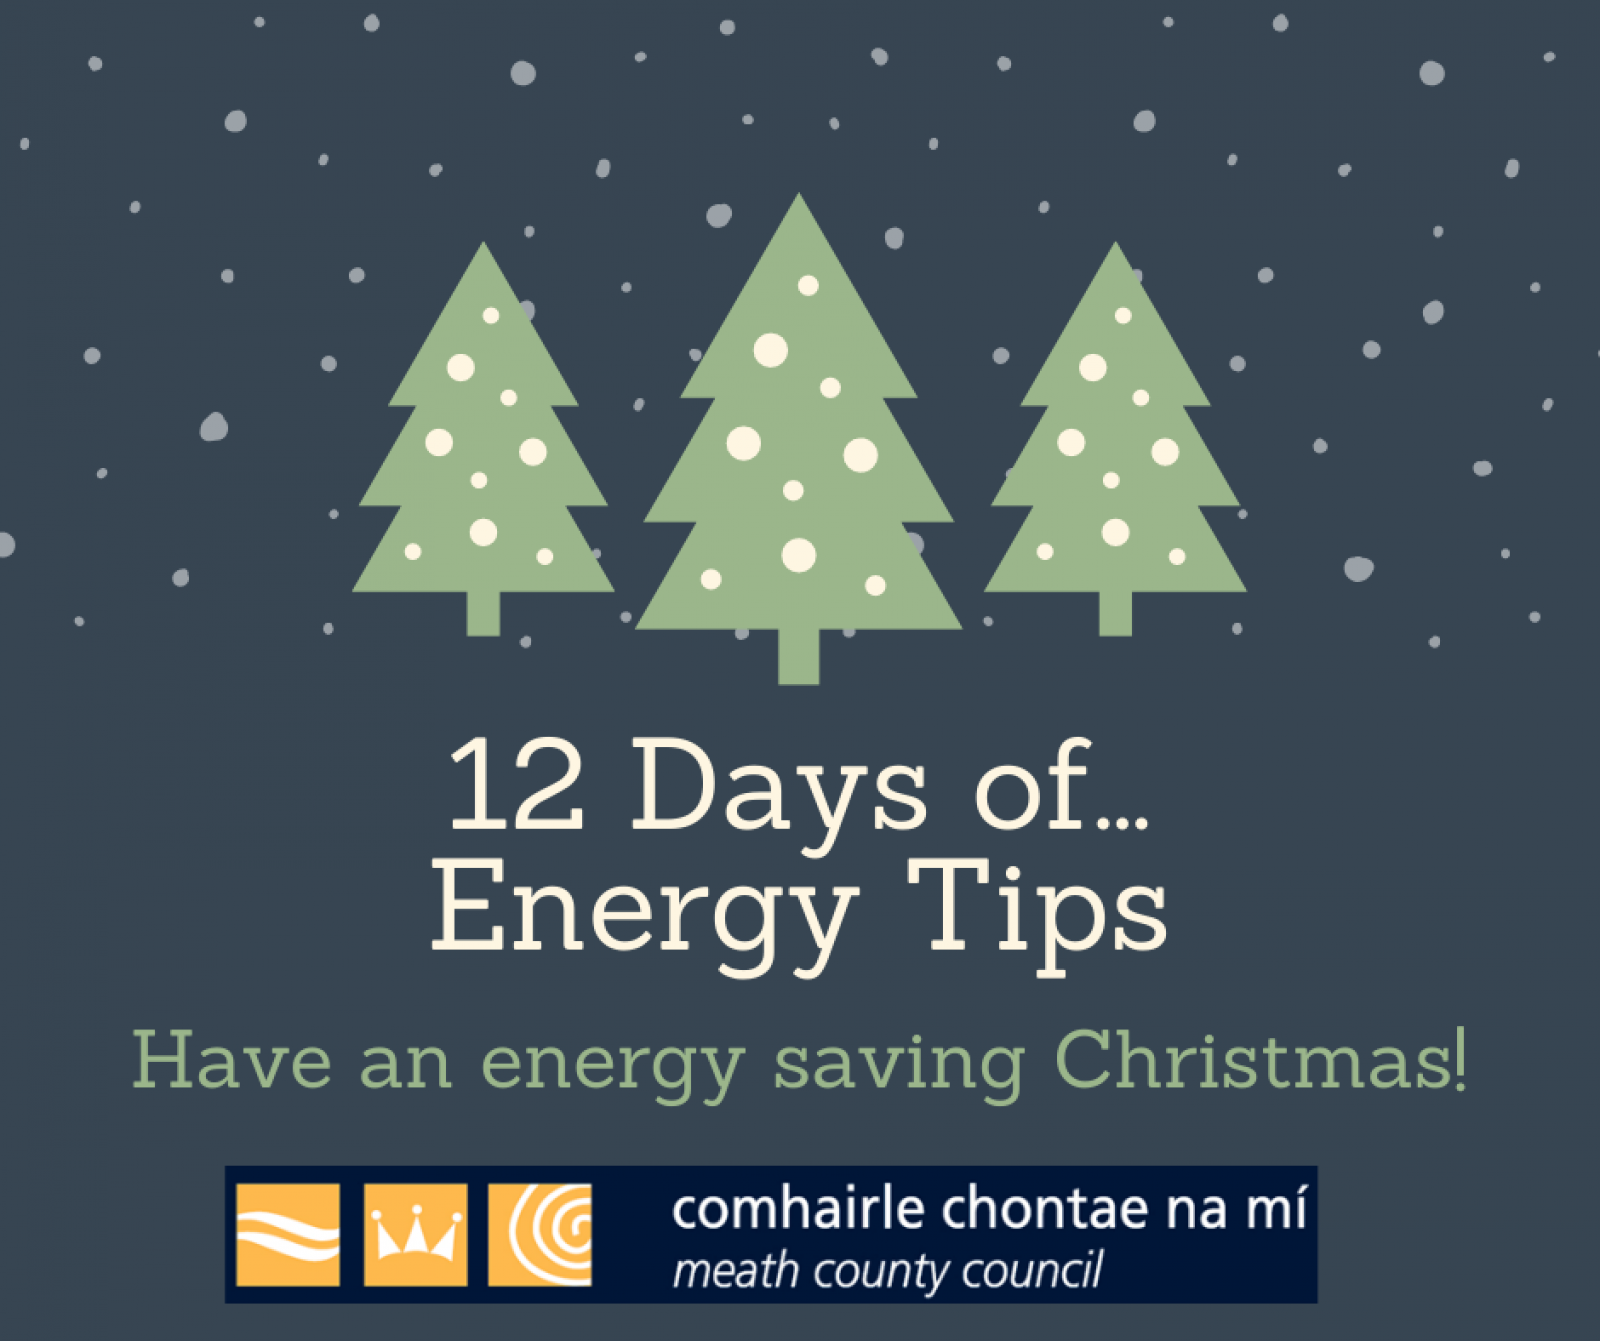 12 Days of Energy Tips